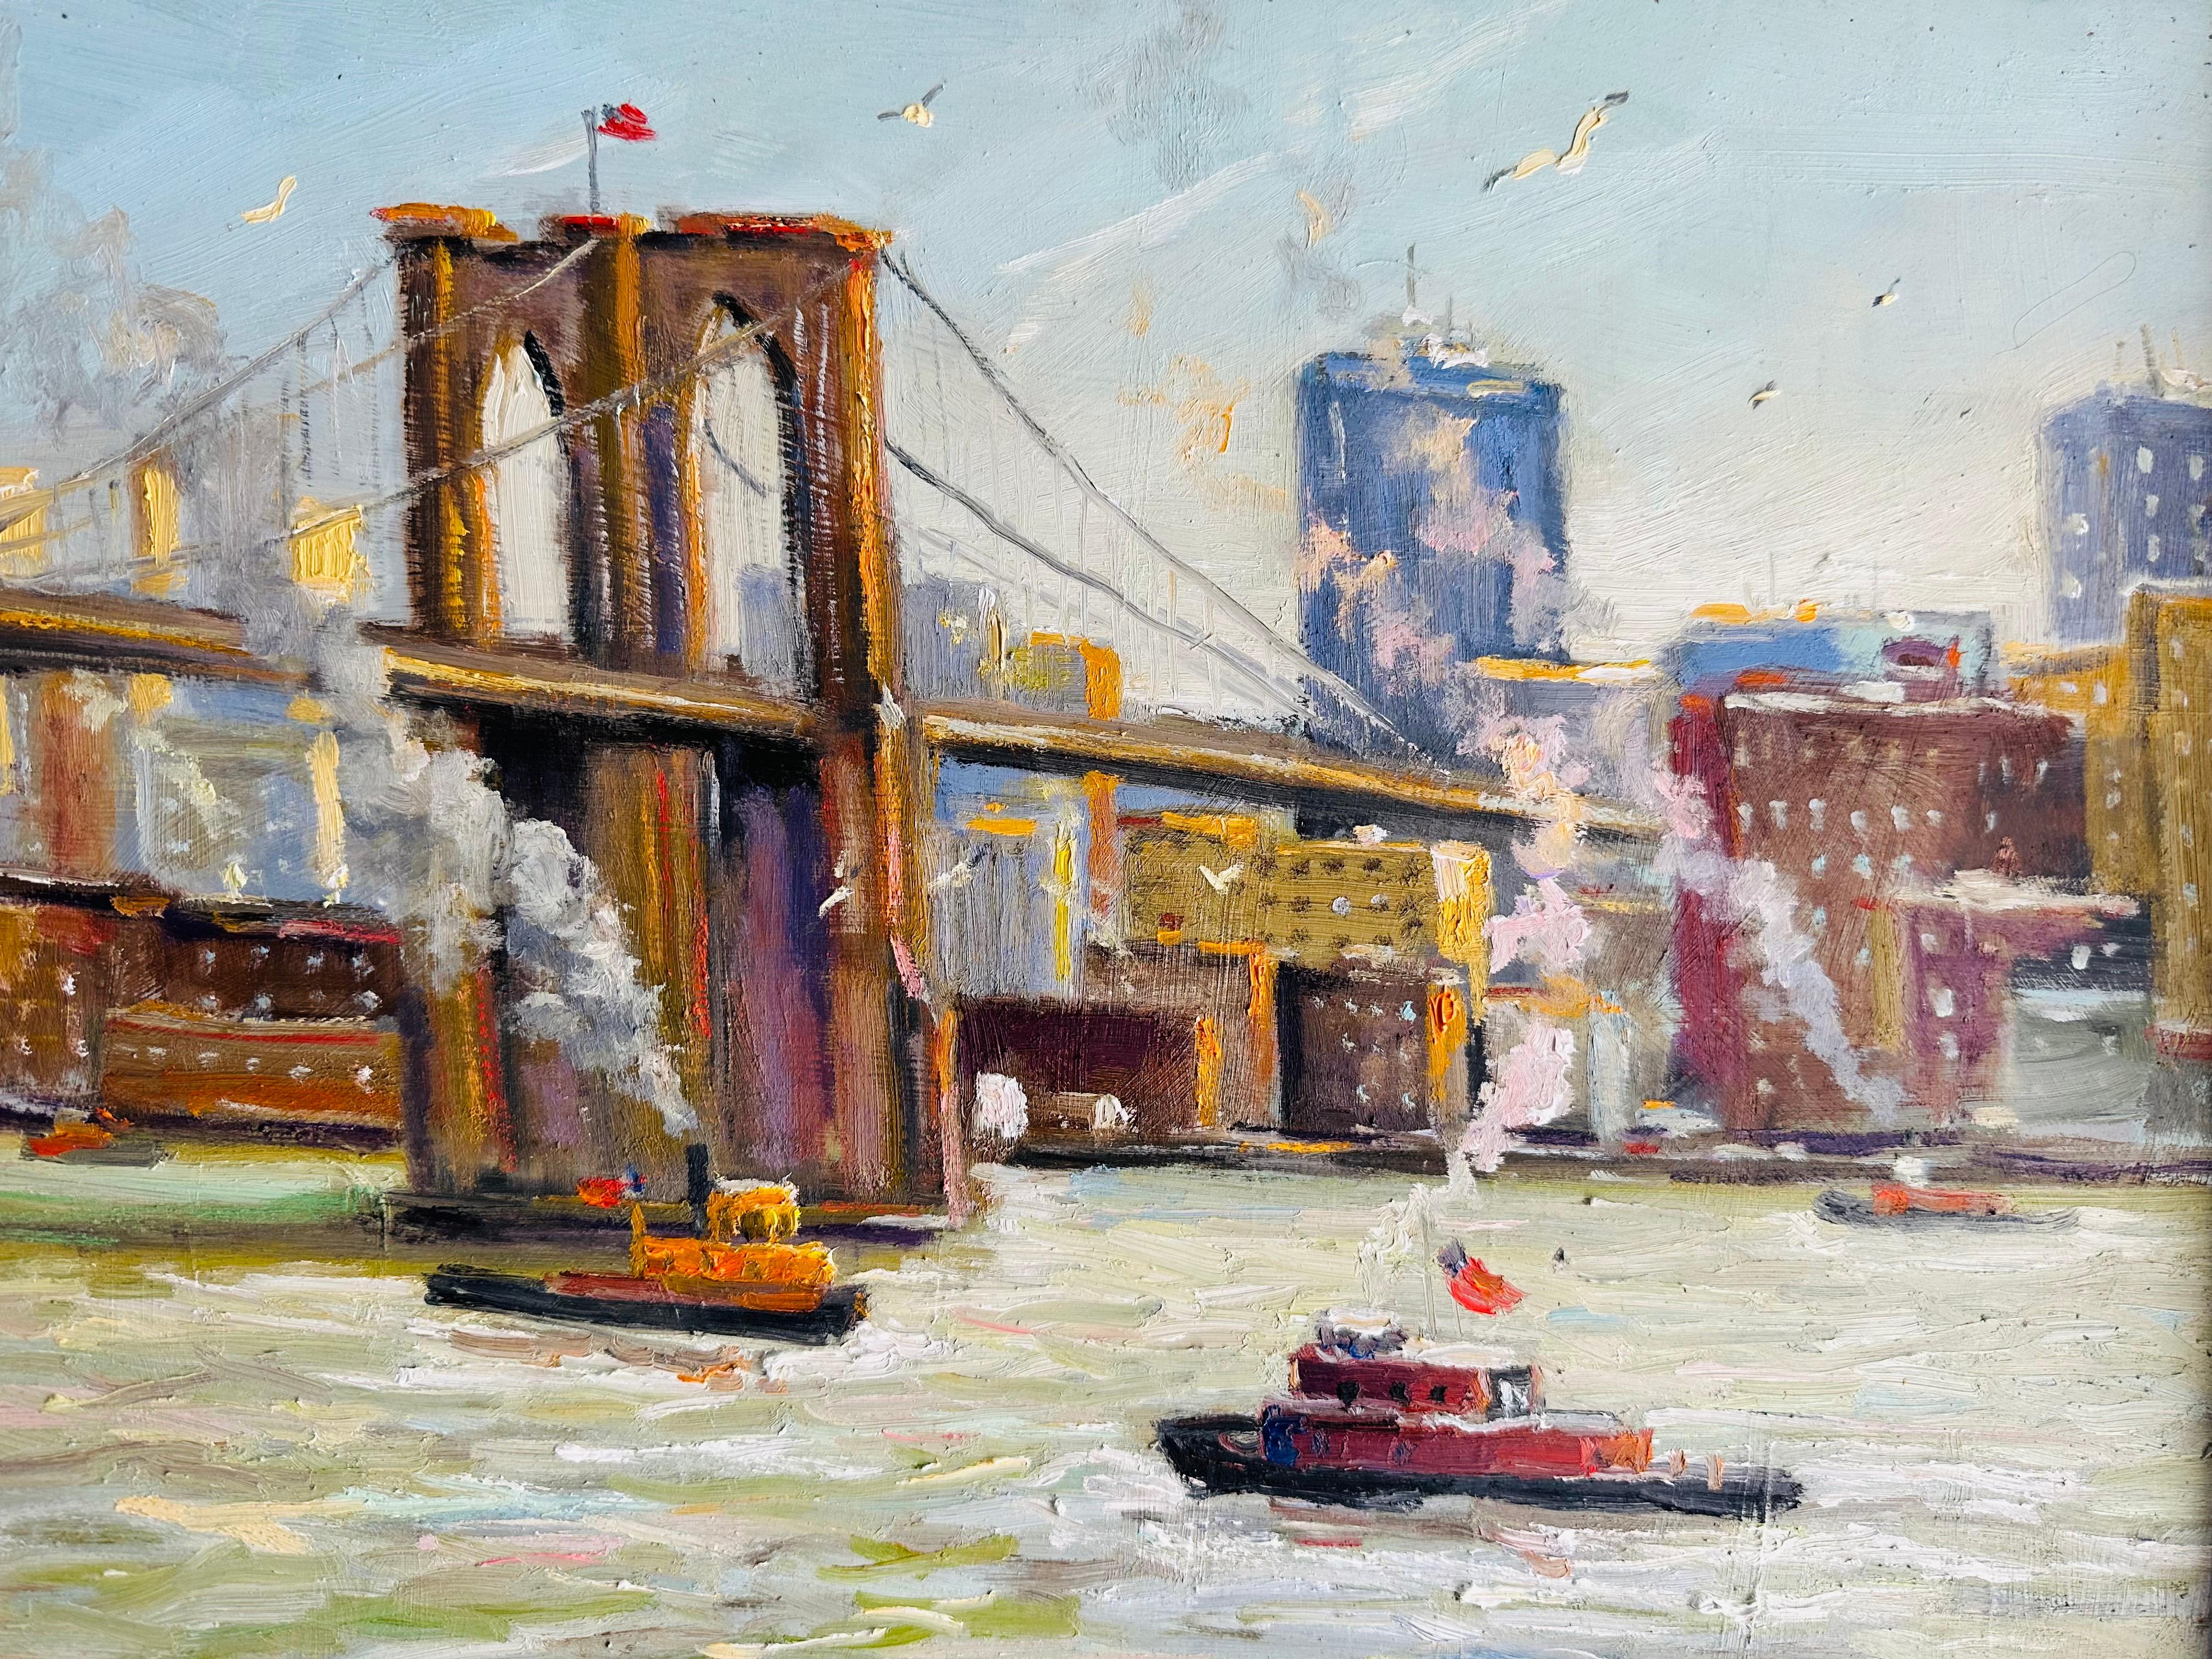 Impressionist New York City a wonderful morning on the East River. Tug boats gently make their way up the river with a backdrop of the Brooklyn Bridge. Birds flying in the crisp morning breeze. From early childhood to the present, Willett, a natural